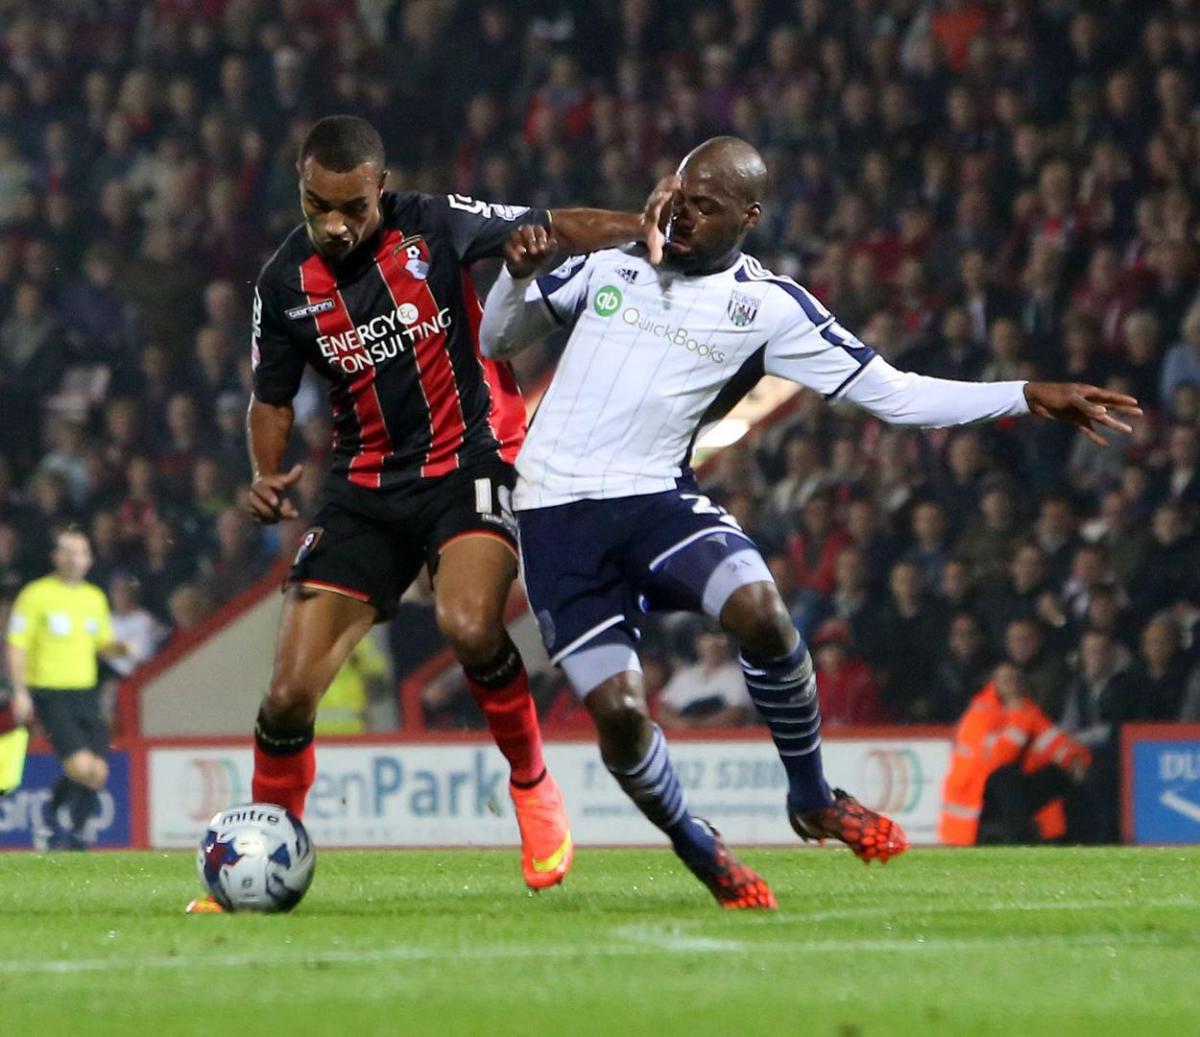 All our pictures of the capital one cup fourth round at Dean Court on Tuesday, October 28. AFC Bournemouth 2, West Bromwich Albion 1. All pictures by Jon Beal. 